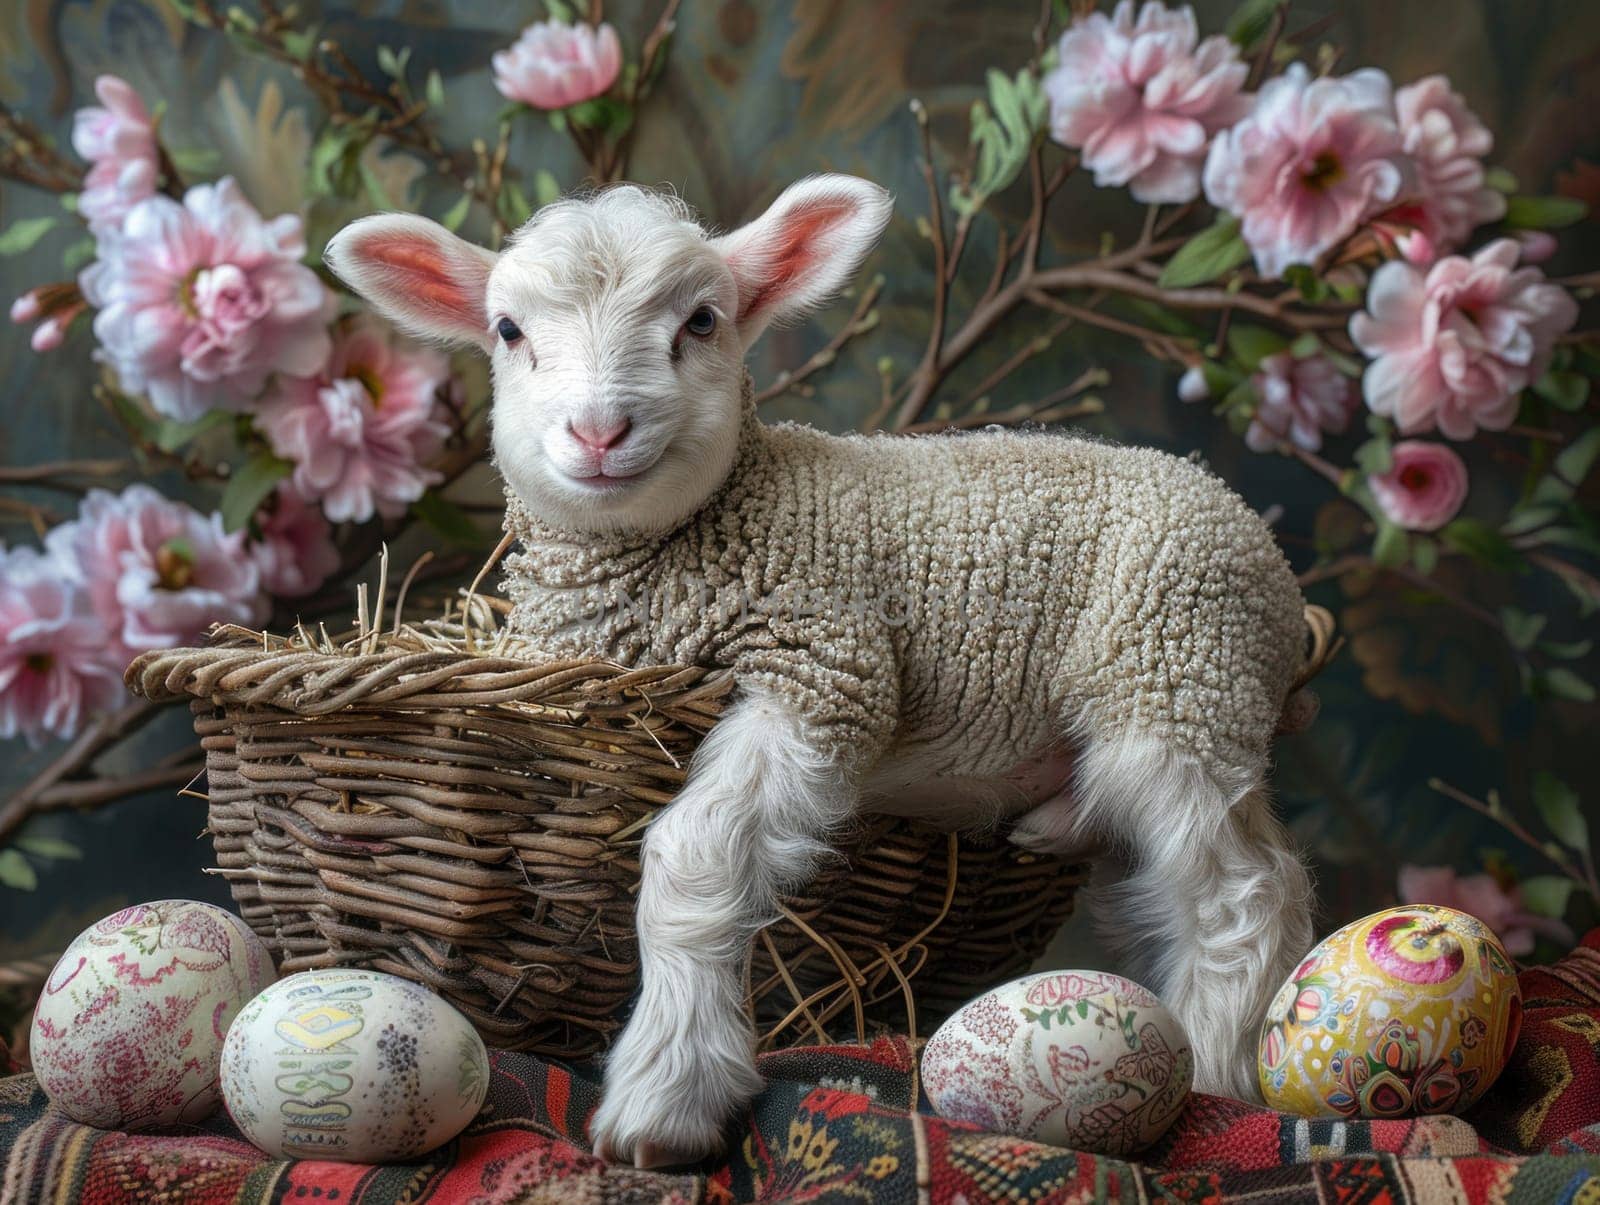 A baby lamb sitting in a basket surrounded by colorful Easter eggs.